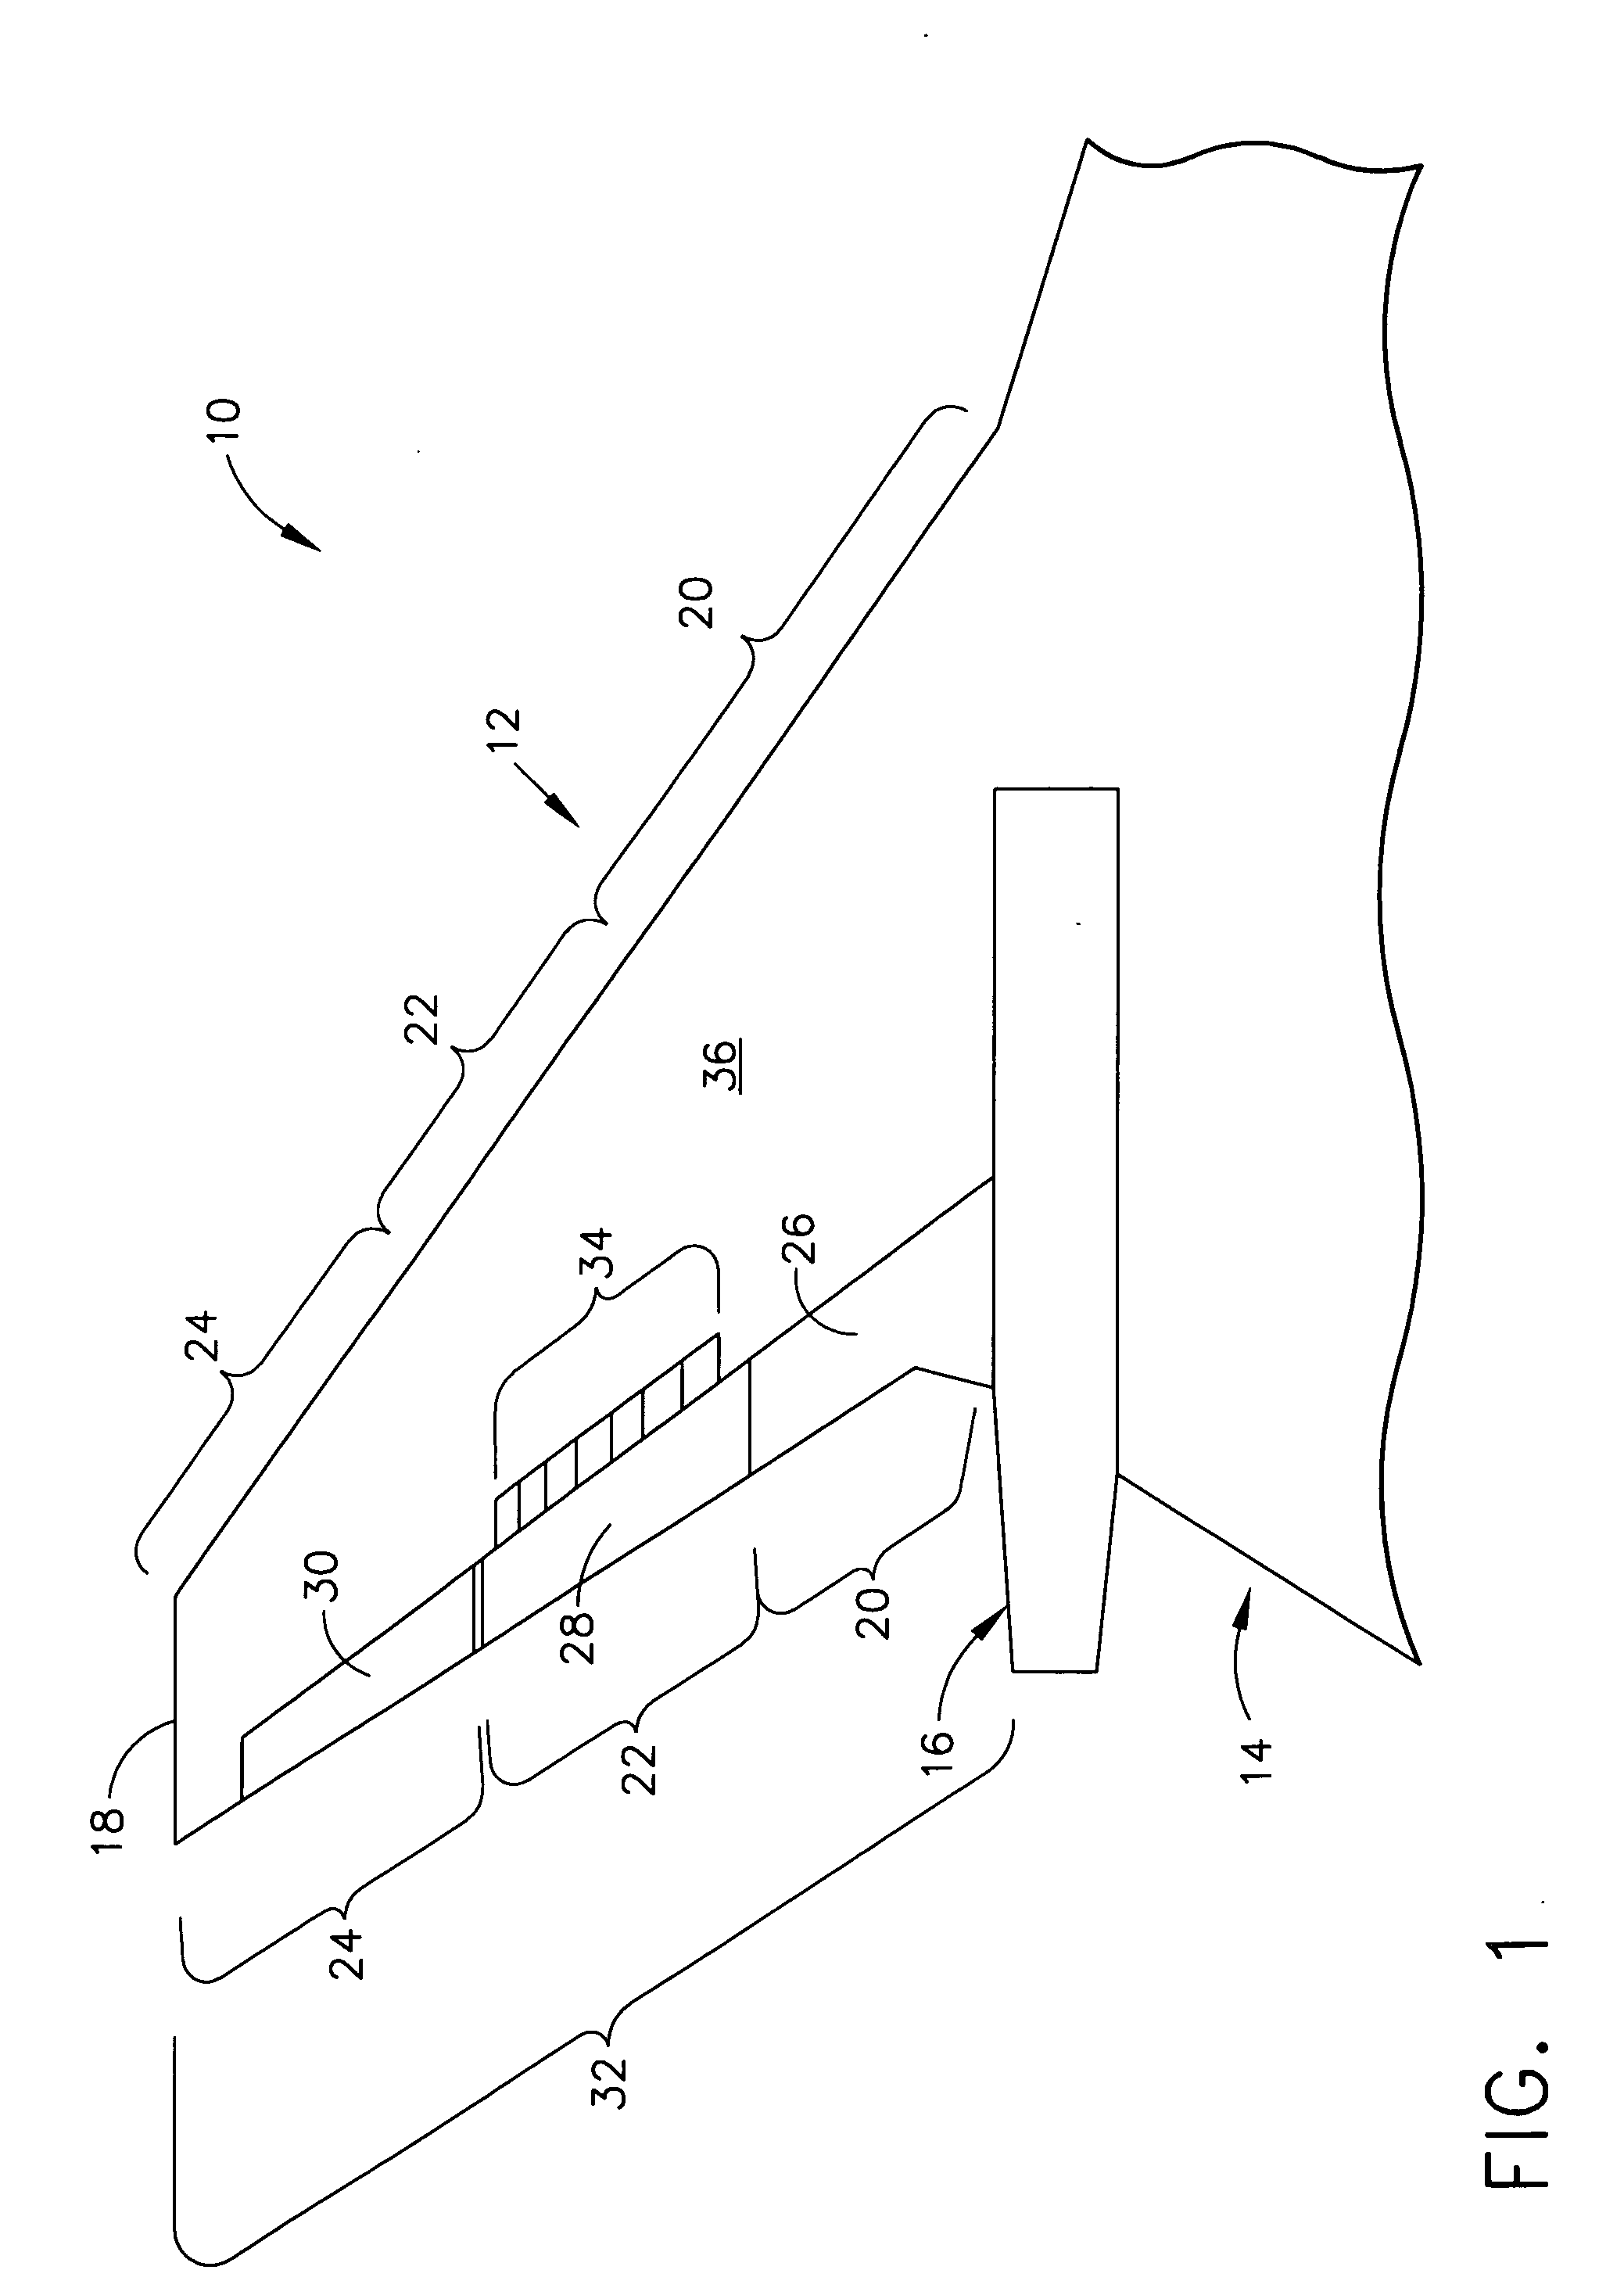 Lifters, methods of flight control and maneuver load alleviation